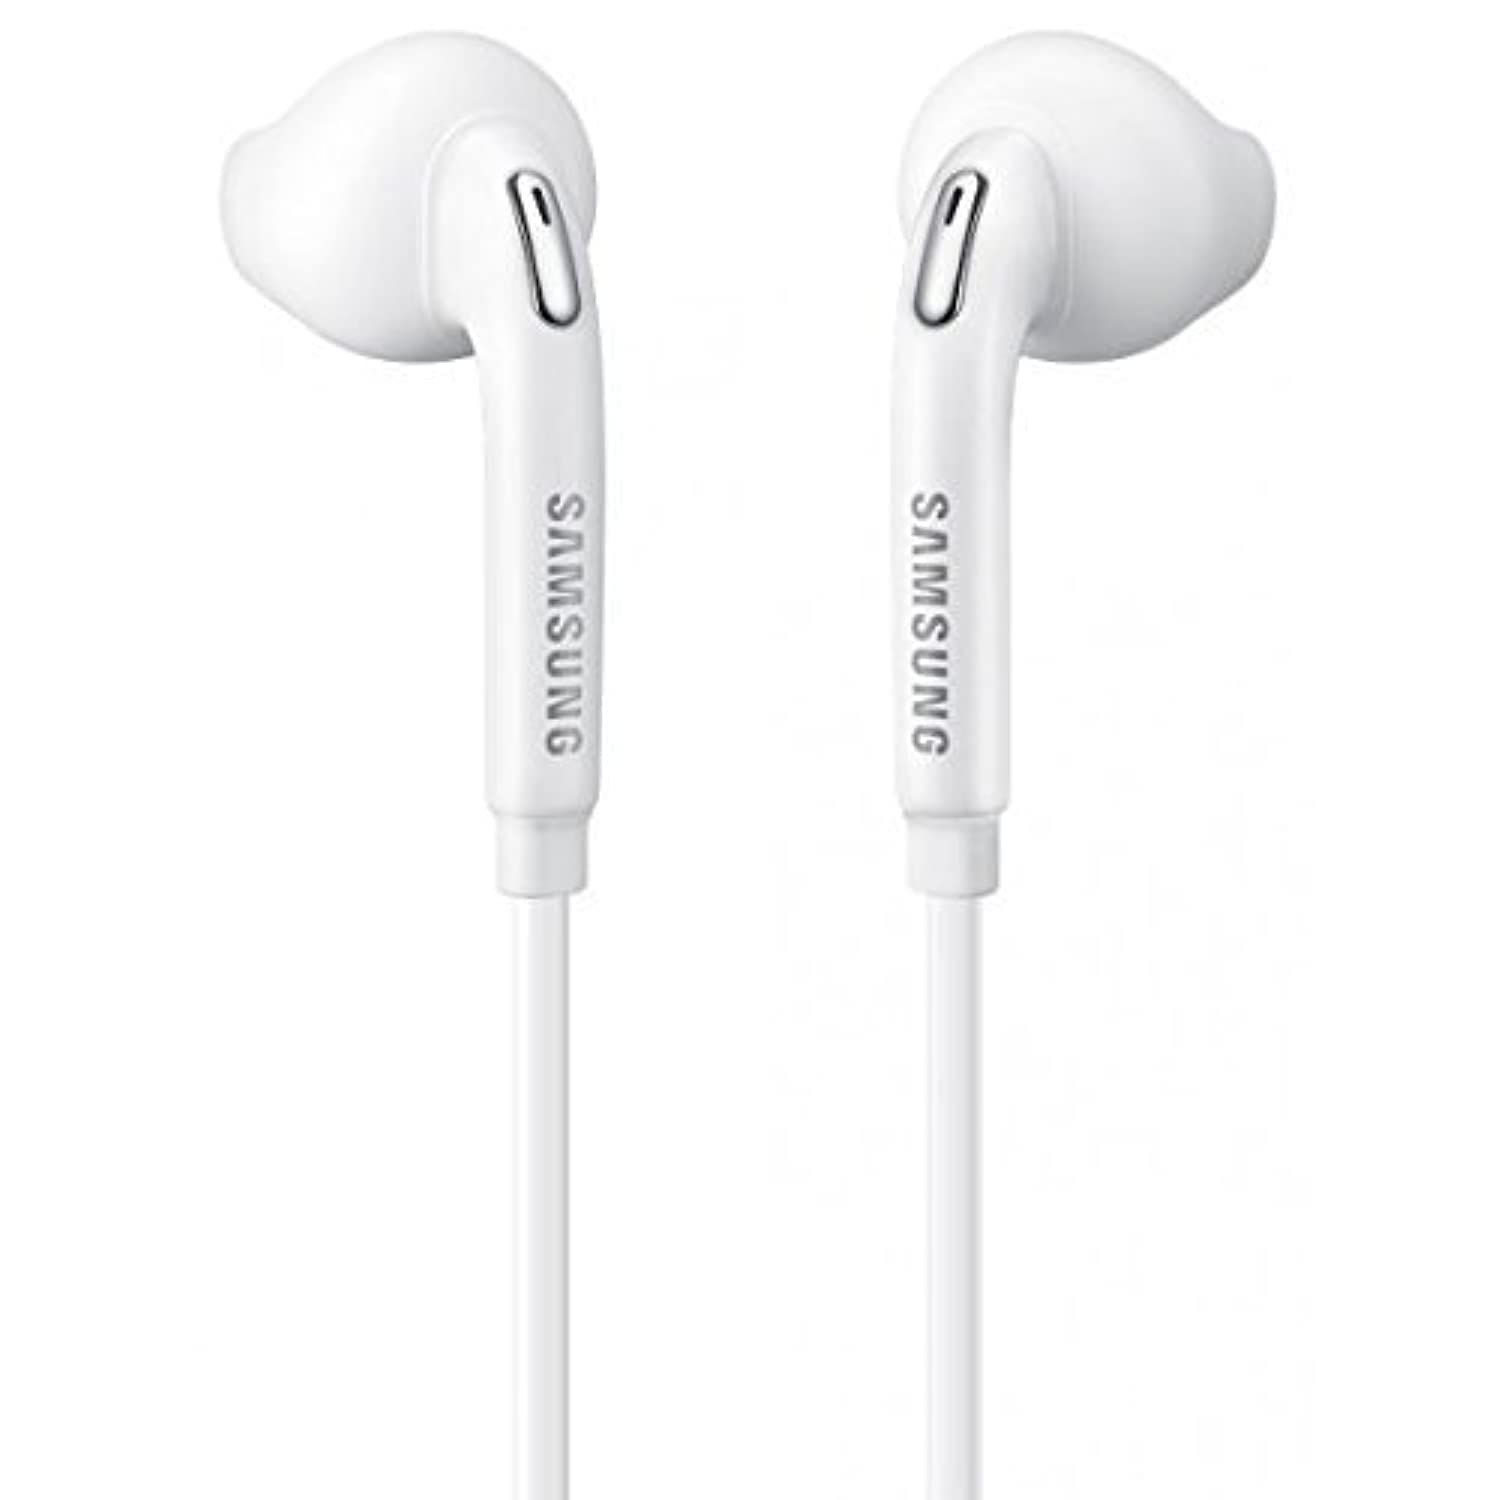 Samsung Eo-Eg920Bw White Headset/Handsfree/Headphone/Earphone with Volume Control for Galaxy Phones (Non Retail Packaging - Bulk Packaging)